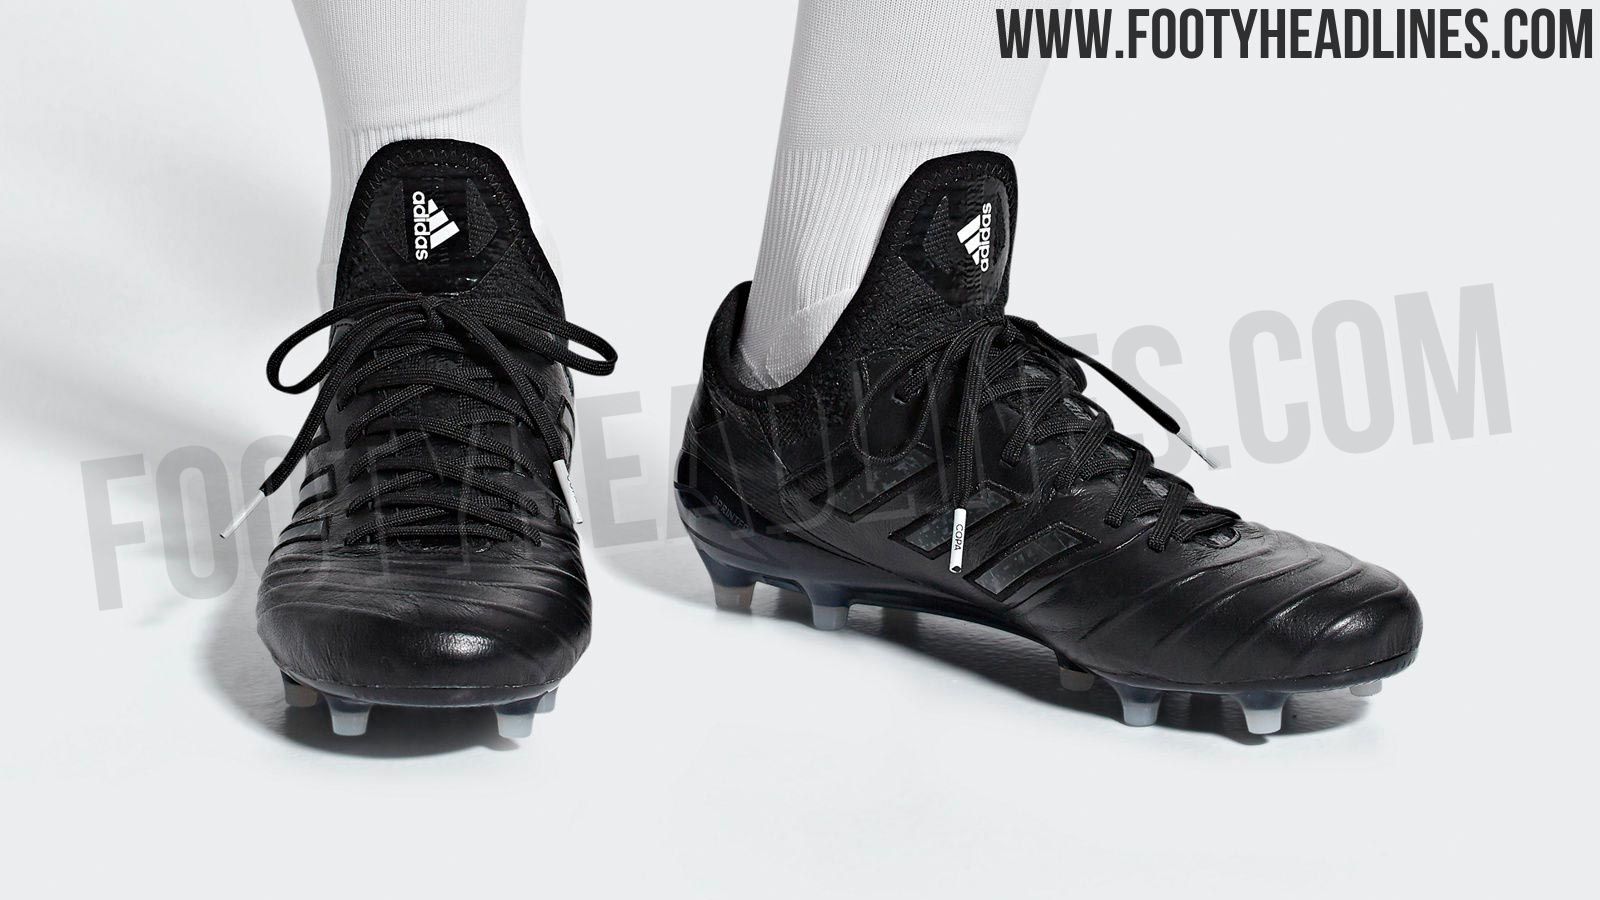 Shadow Mode Adidas Copa Leaked Footy